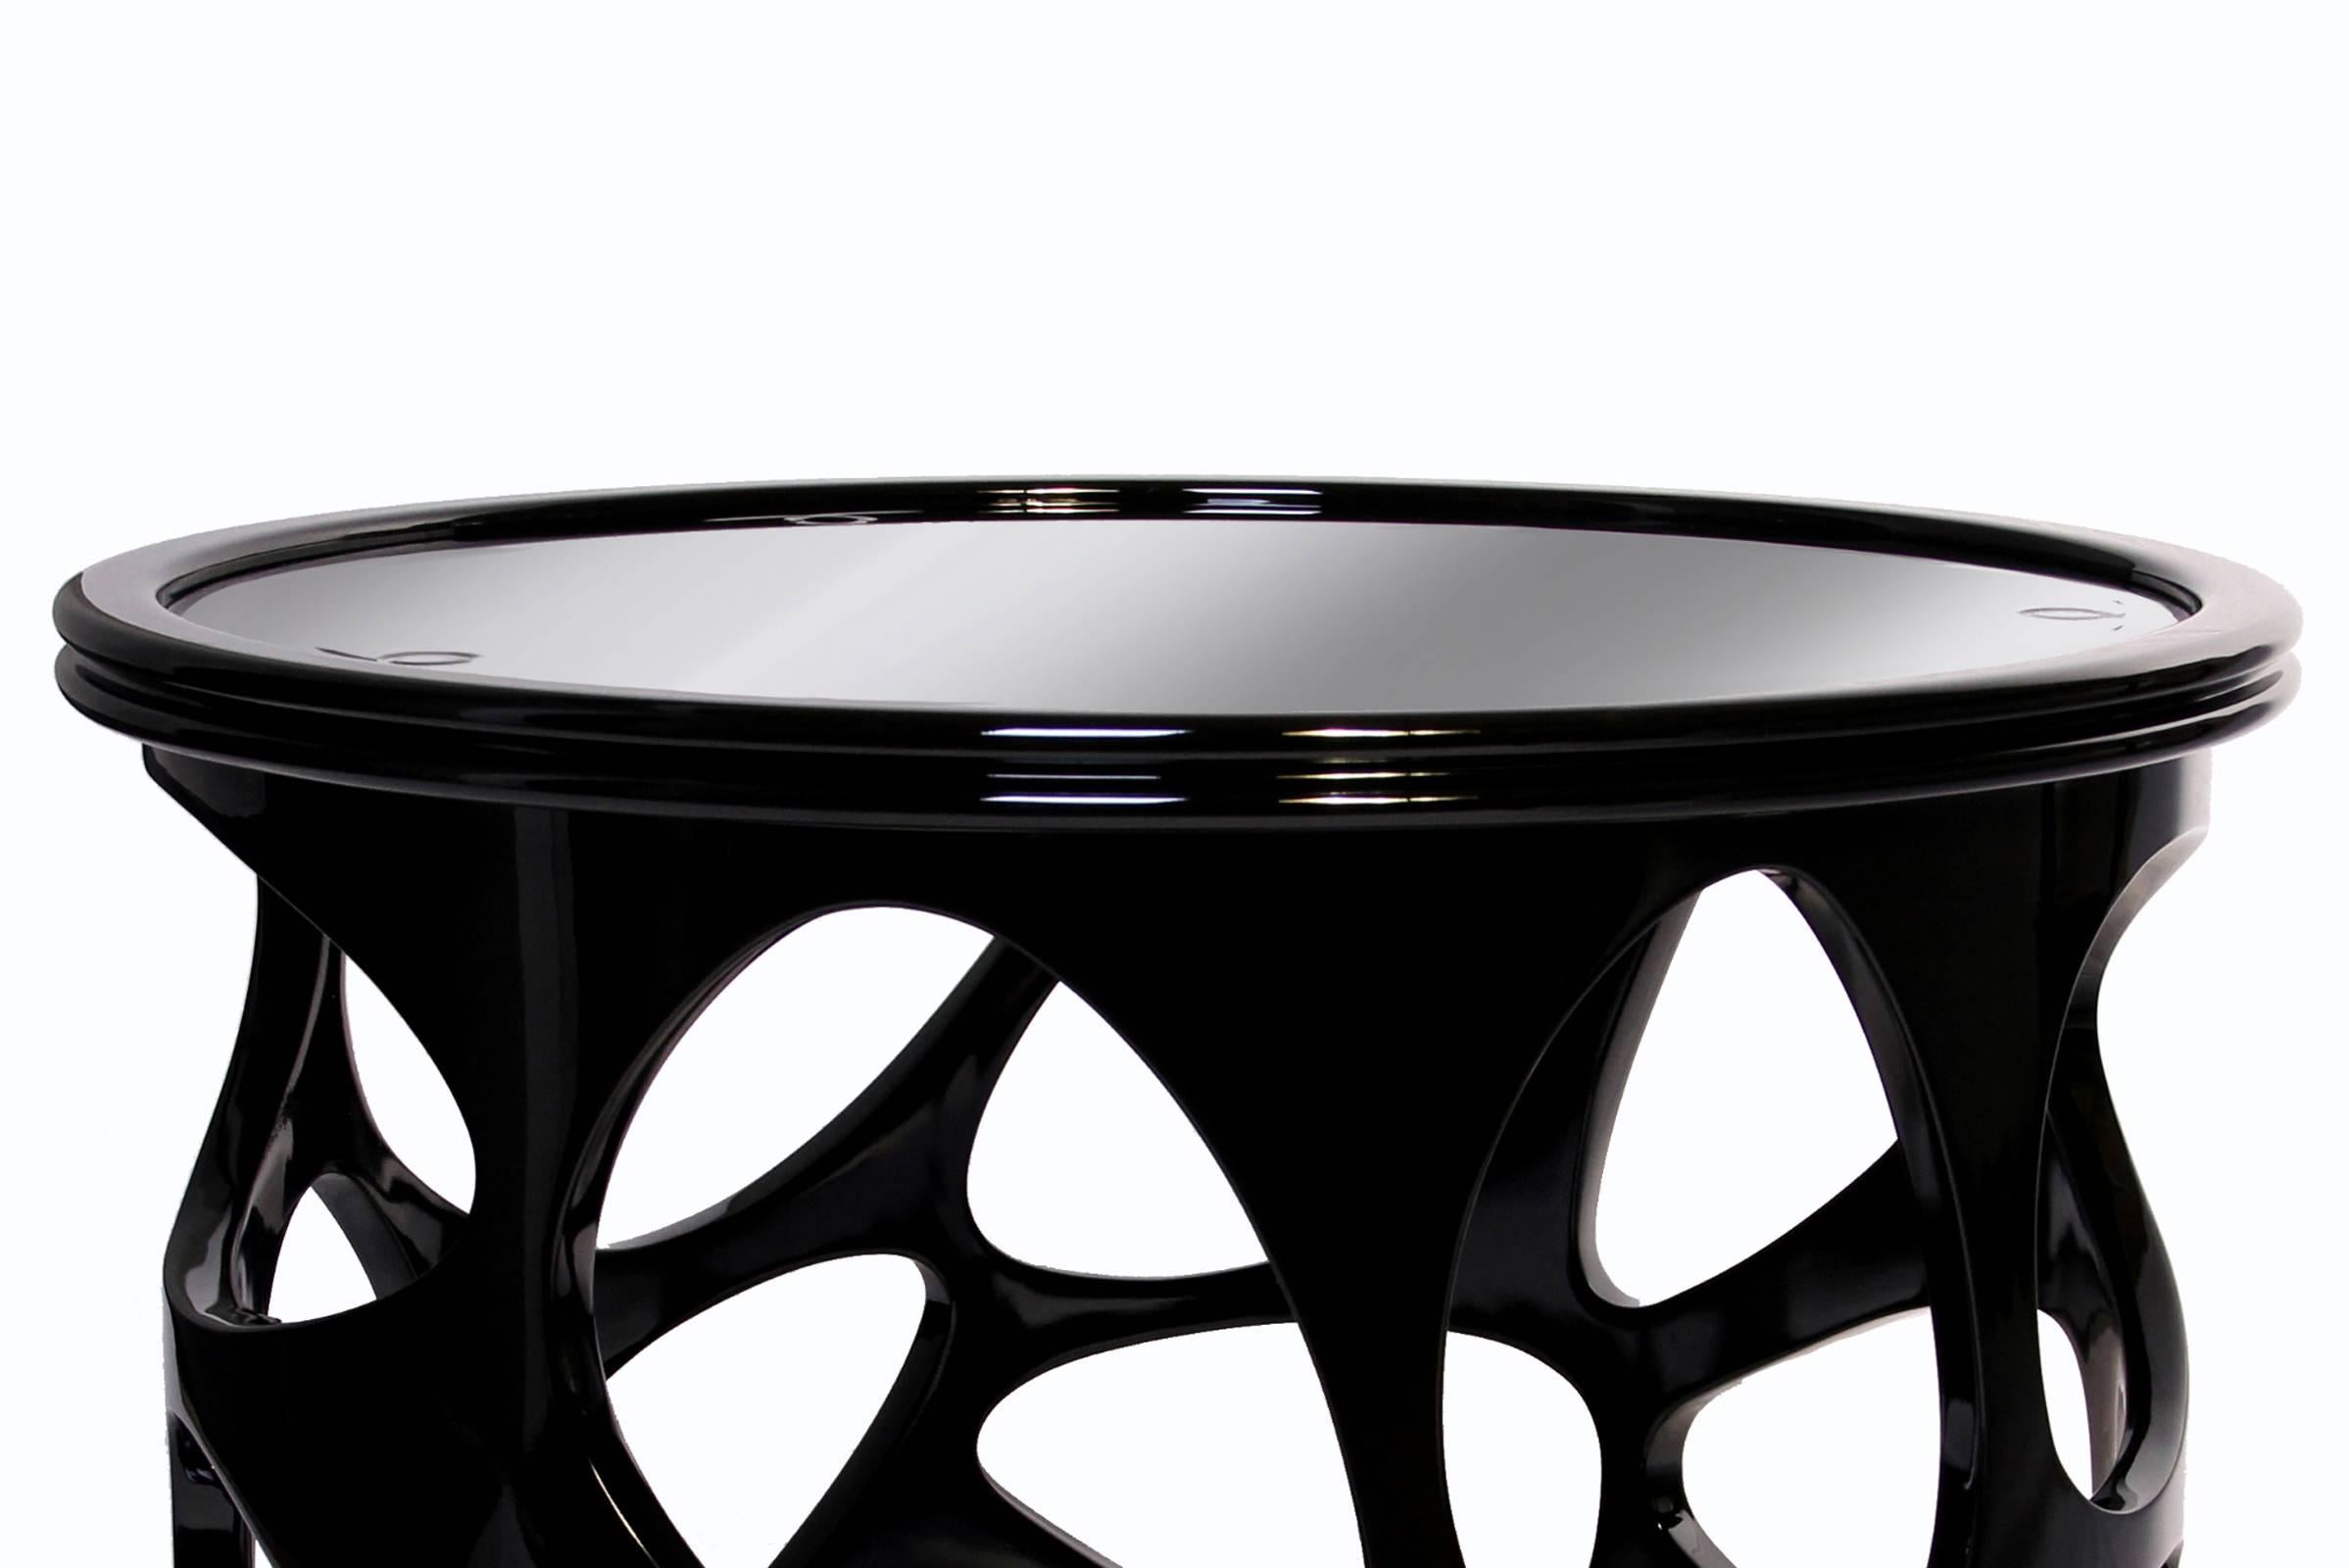 Side table Archi in black lacquered mahogany.
Top with polished black glass lacquered.
Handcrafted side table.
